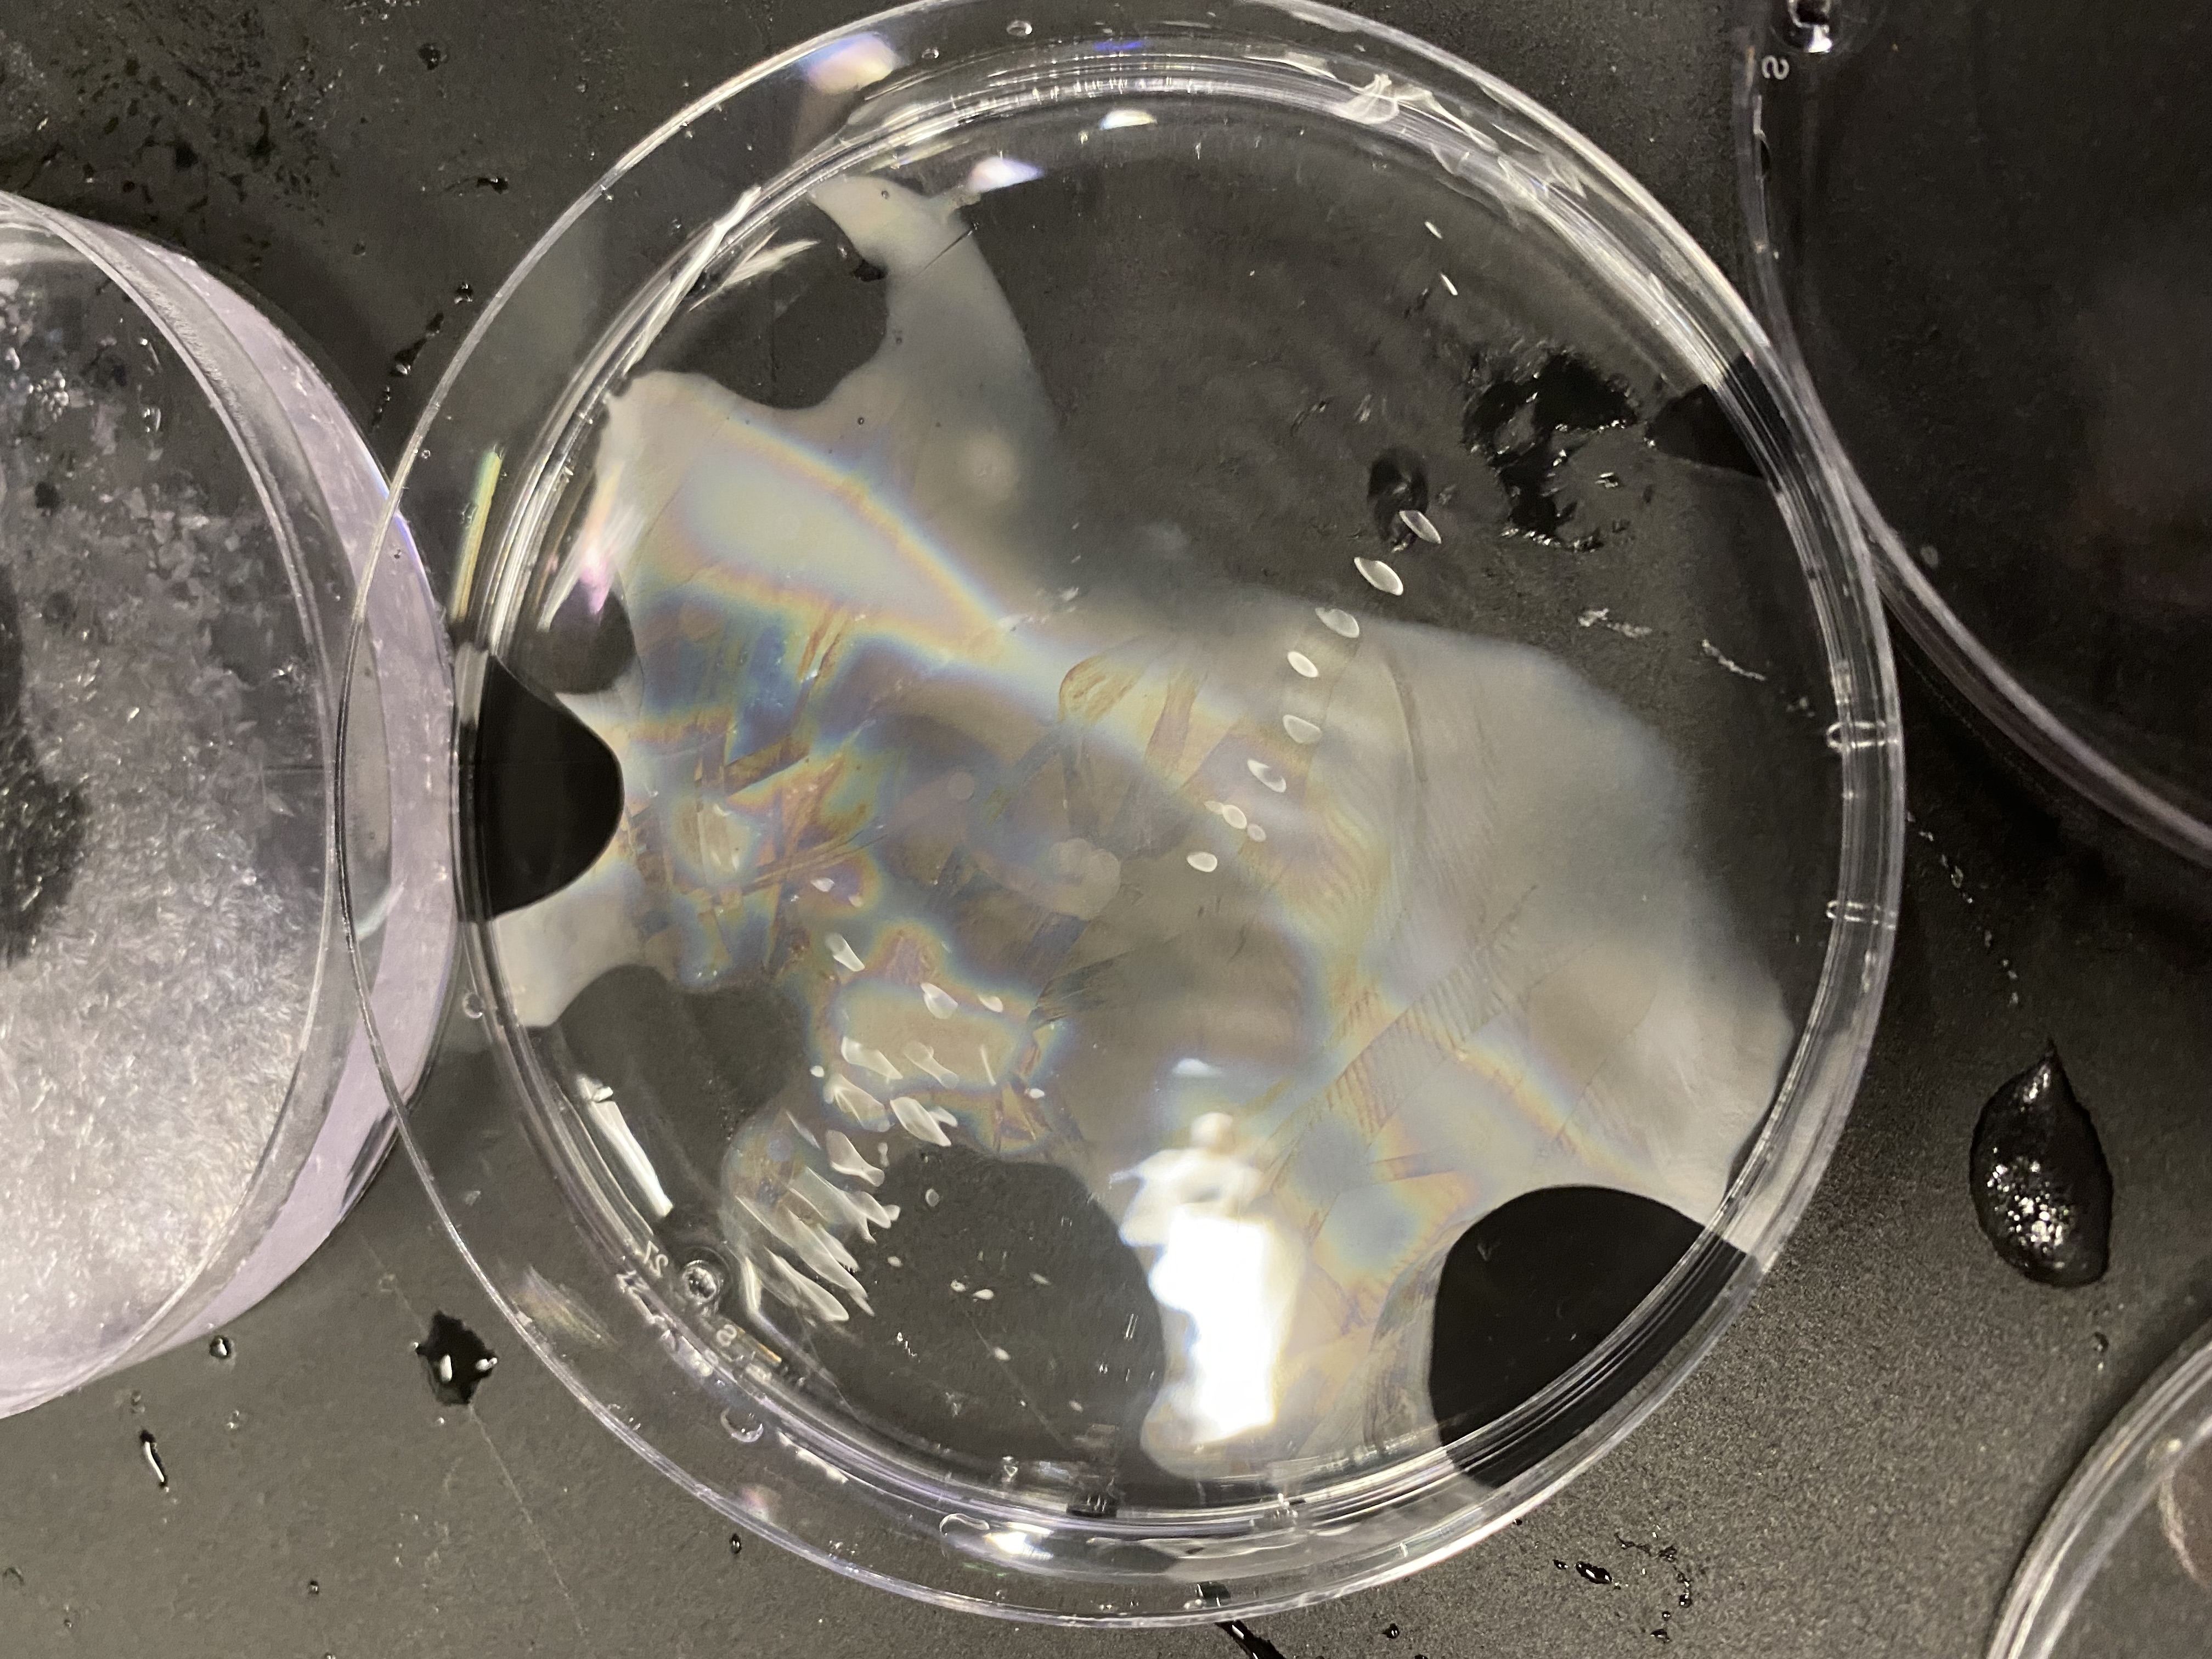 Light bending effects from heat and cymatics in petri dish with water